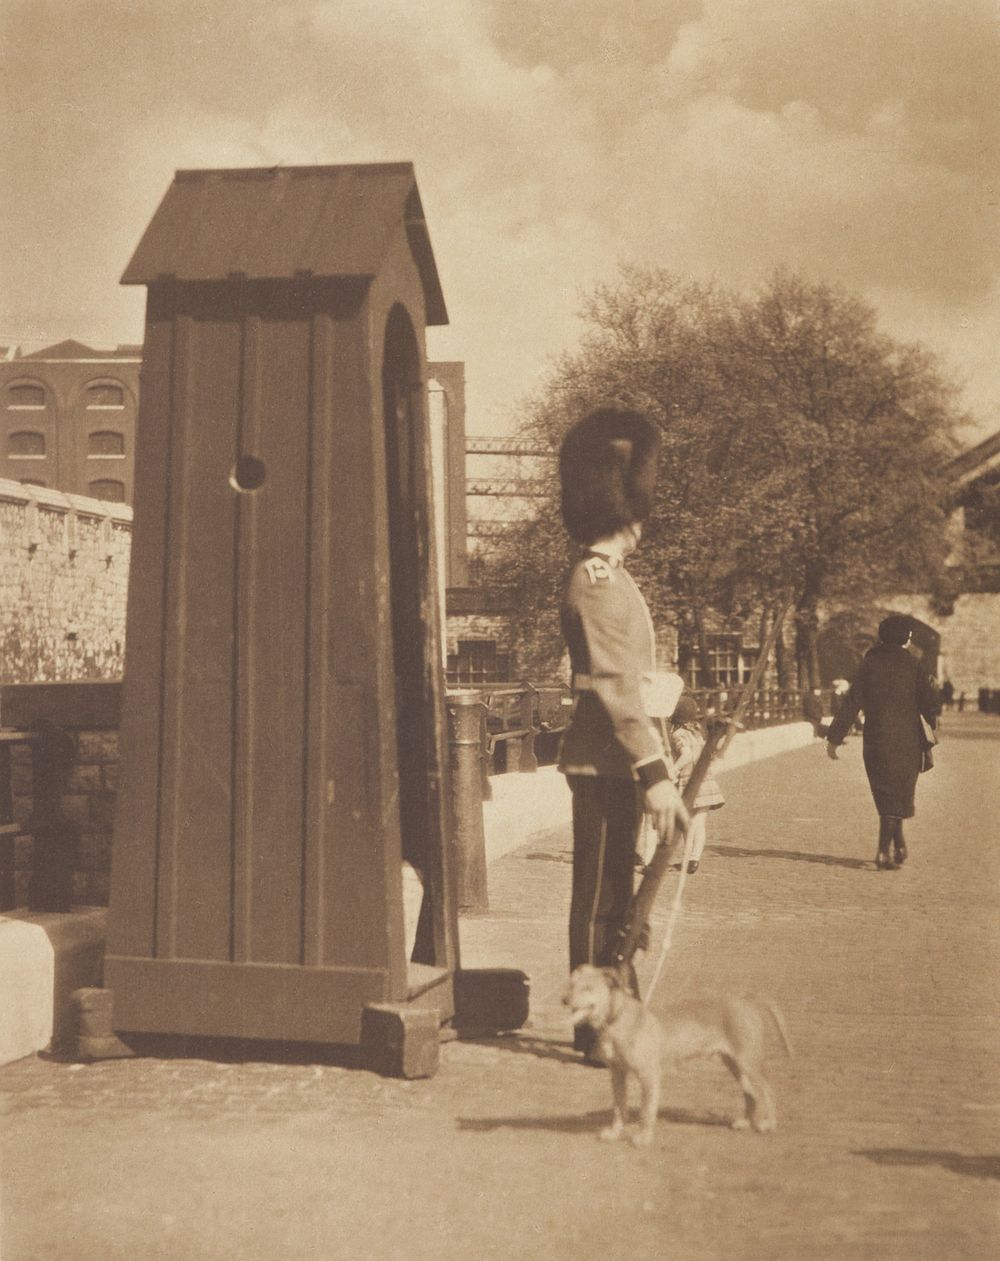 A tower sentry. From the album: Photograph album - London (1920s) by Harry Moult.